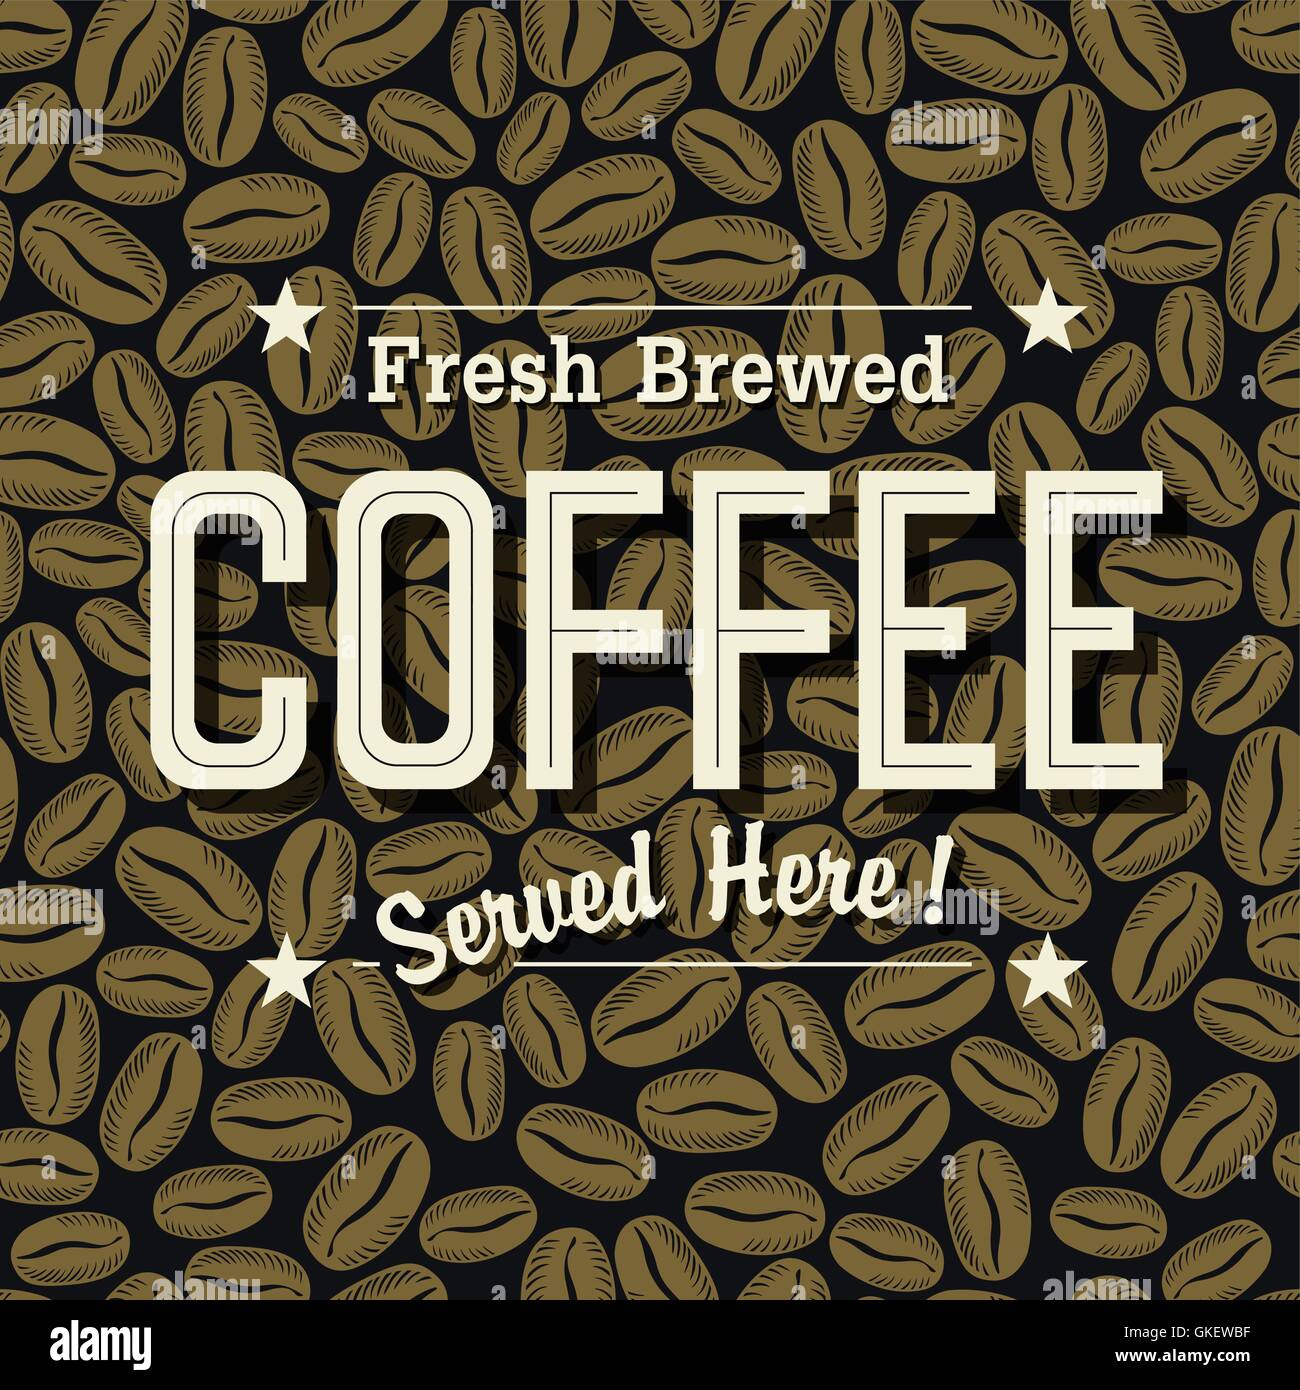 Vintage Coffee Poster. 'Fresh Brewed Coffee Served Here' Letteri Stock Vector